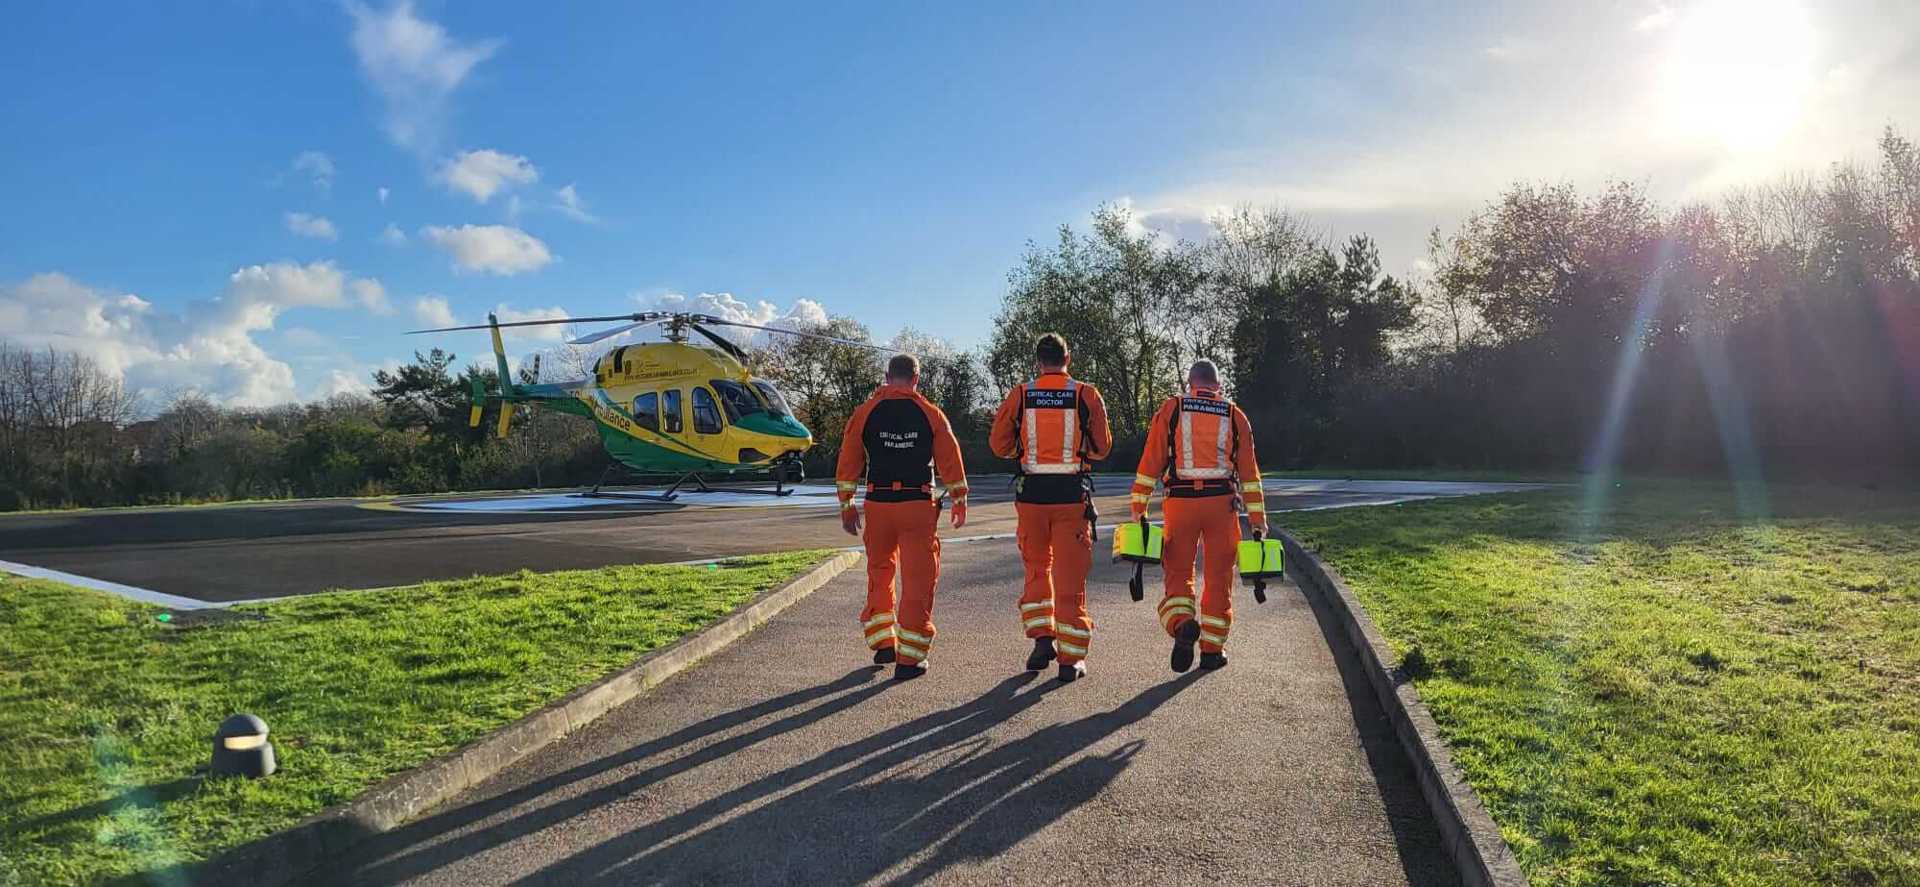 Three paramedics walking towards the helicopter which has landed on a hospital helipad.